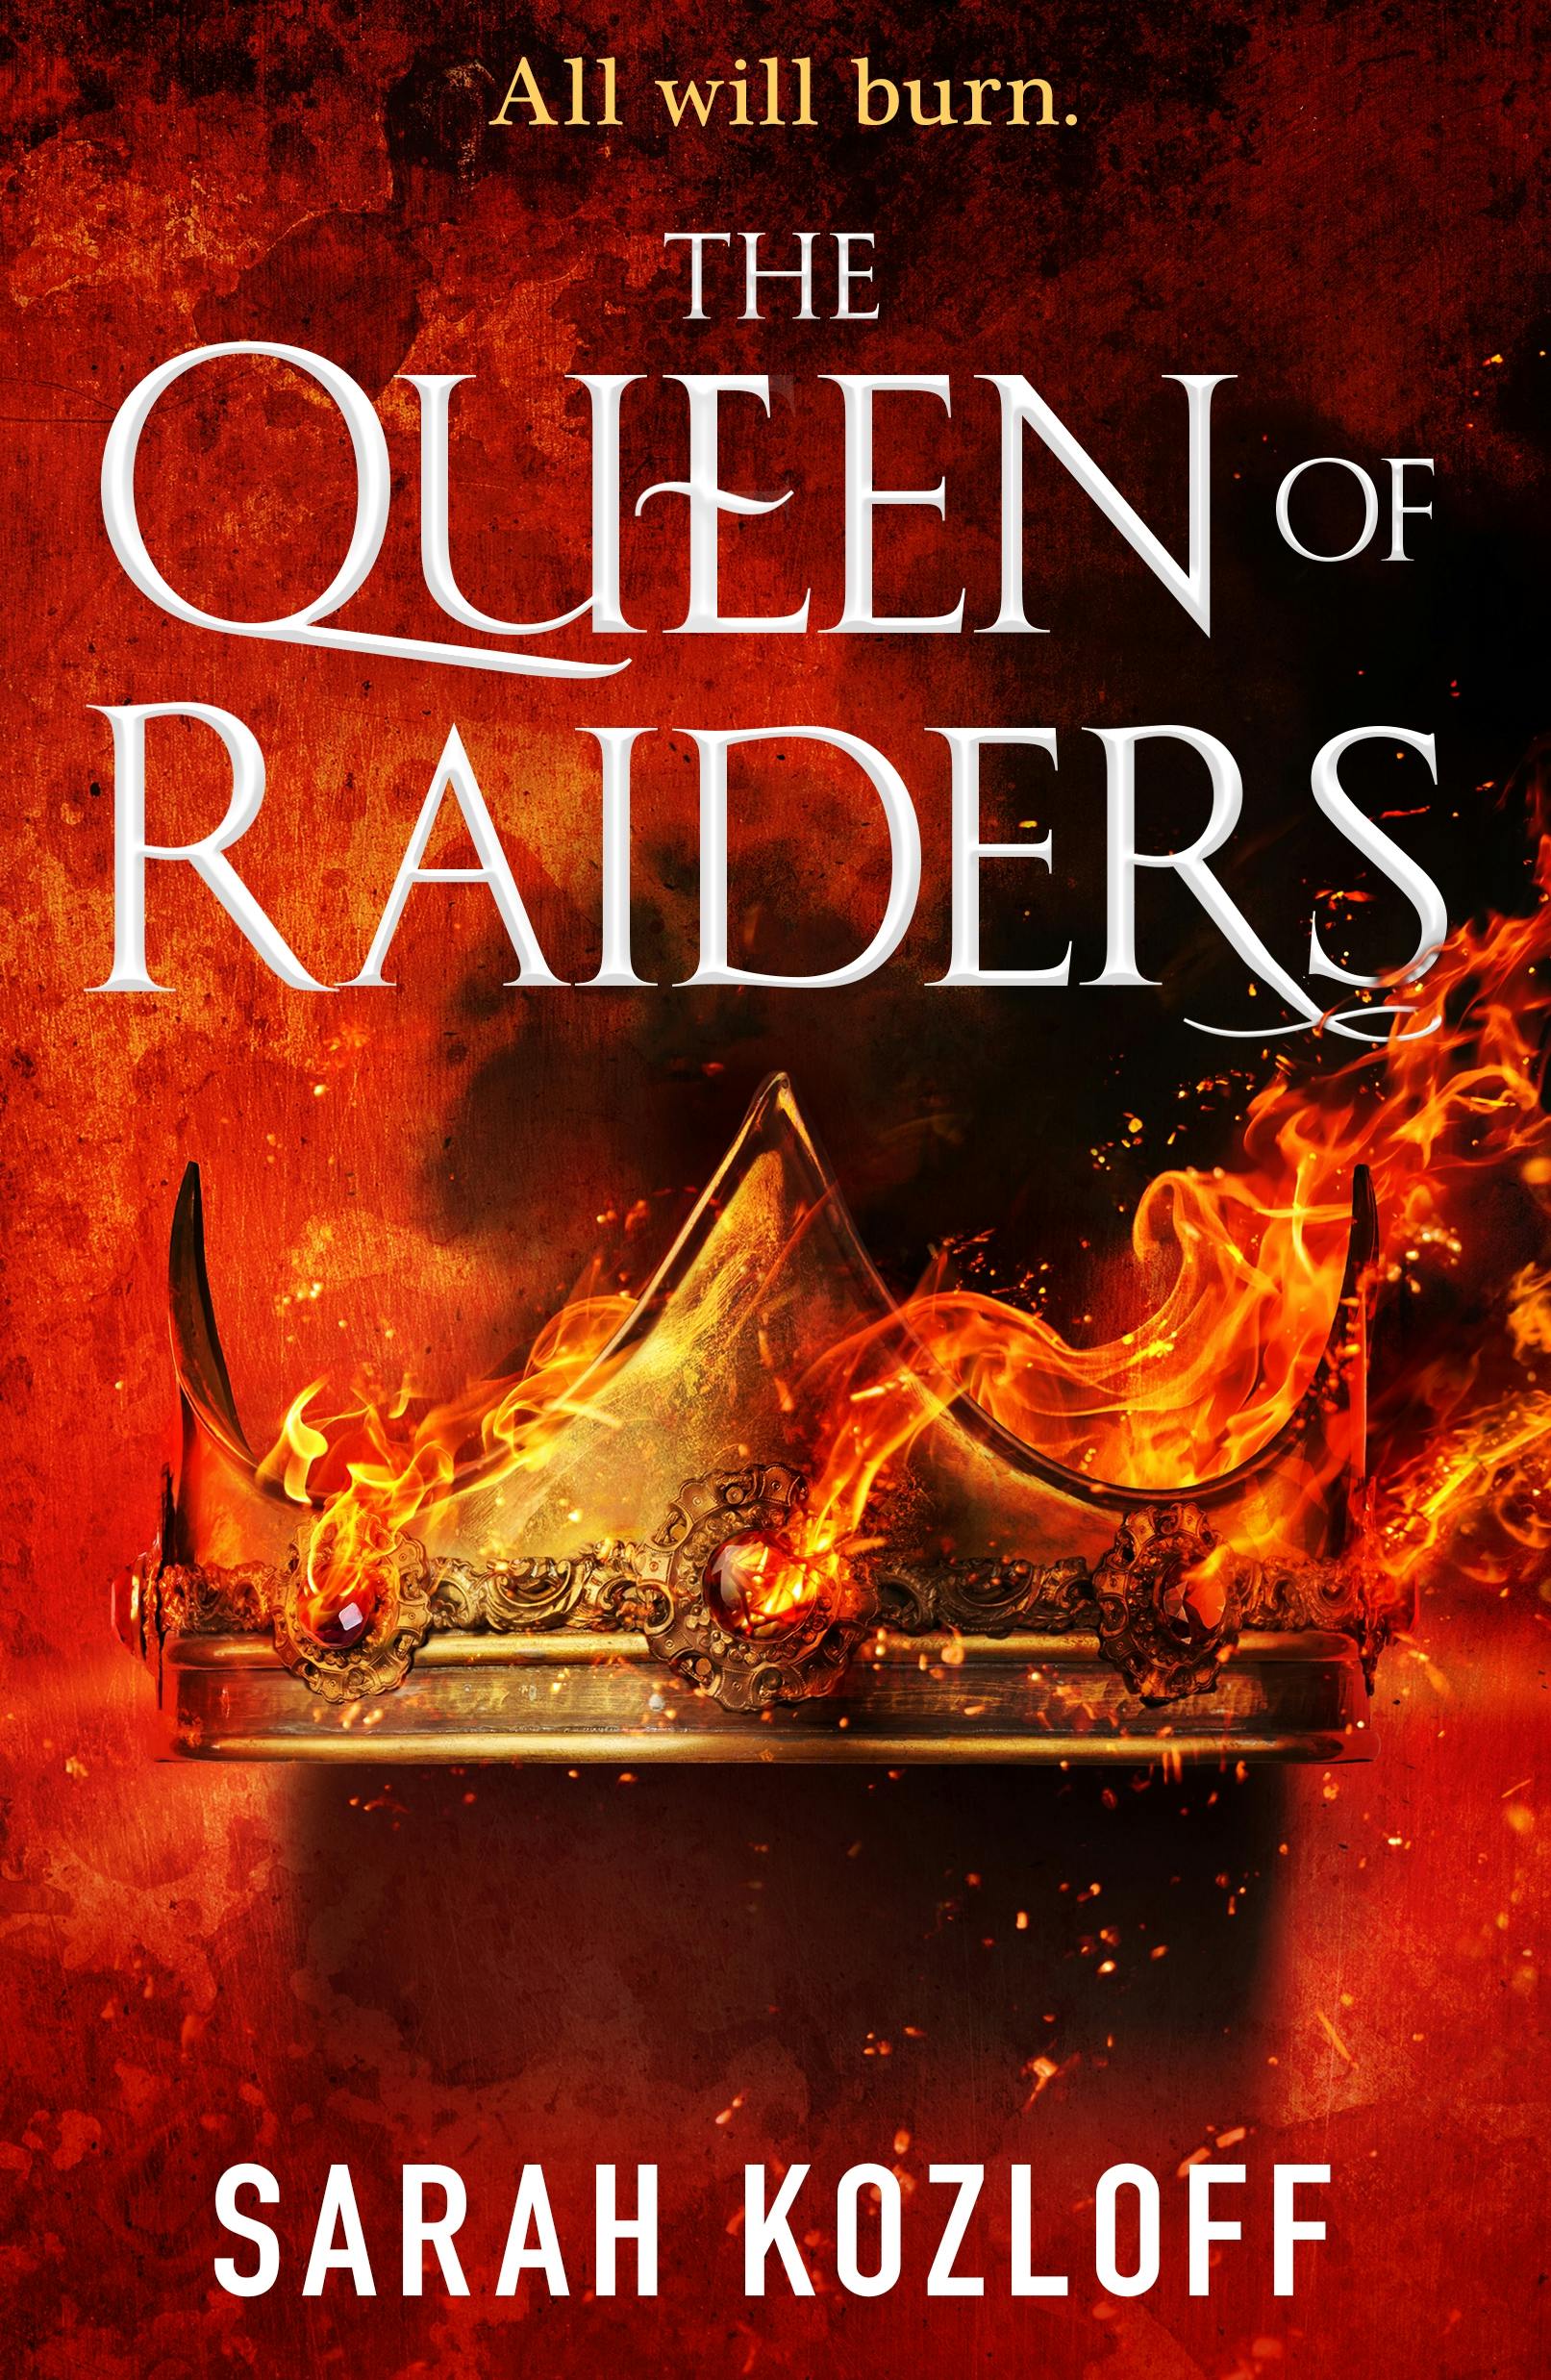 Cover for the book titled as: The Queen of Raiders